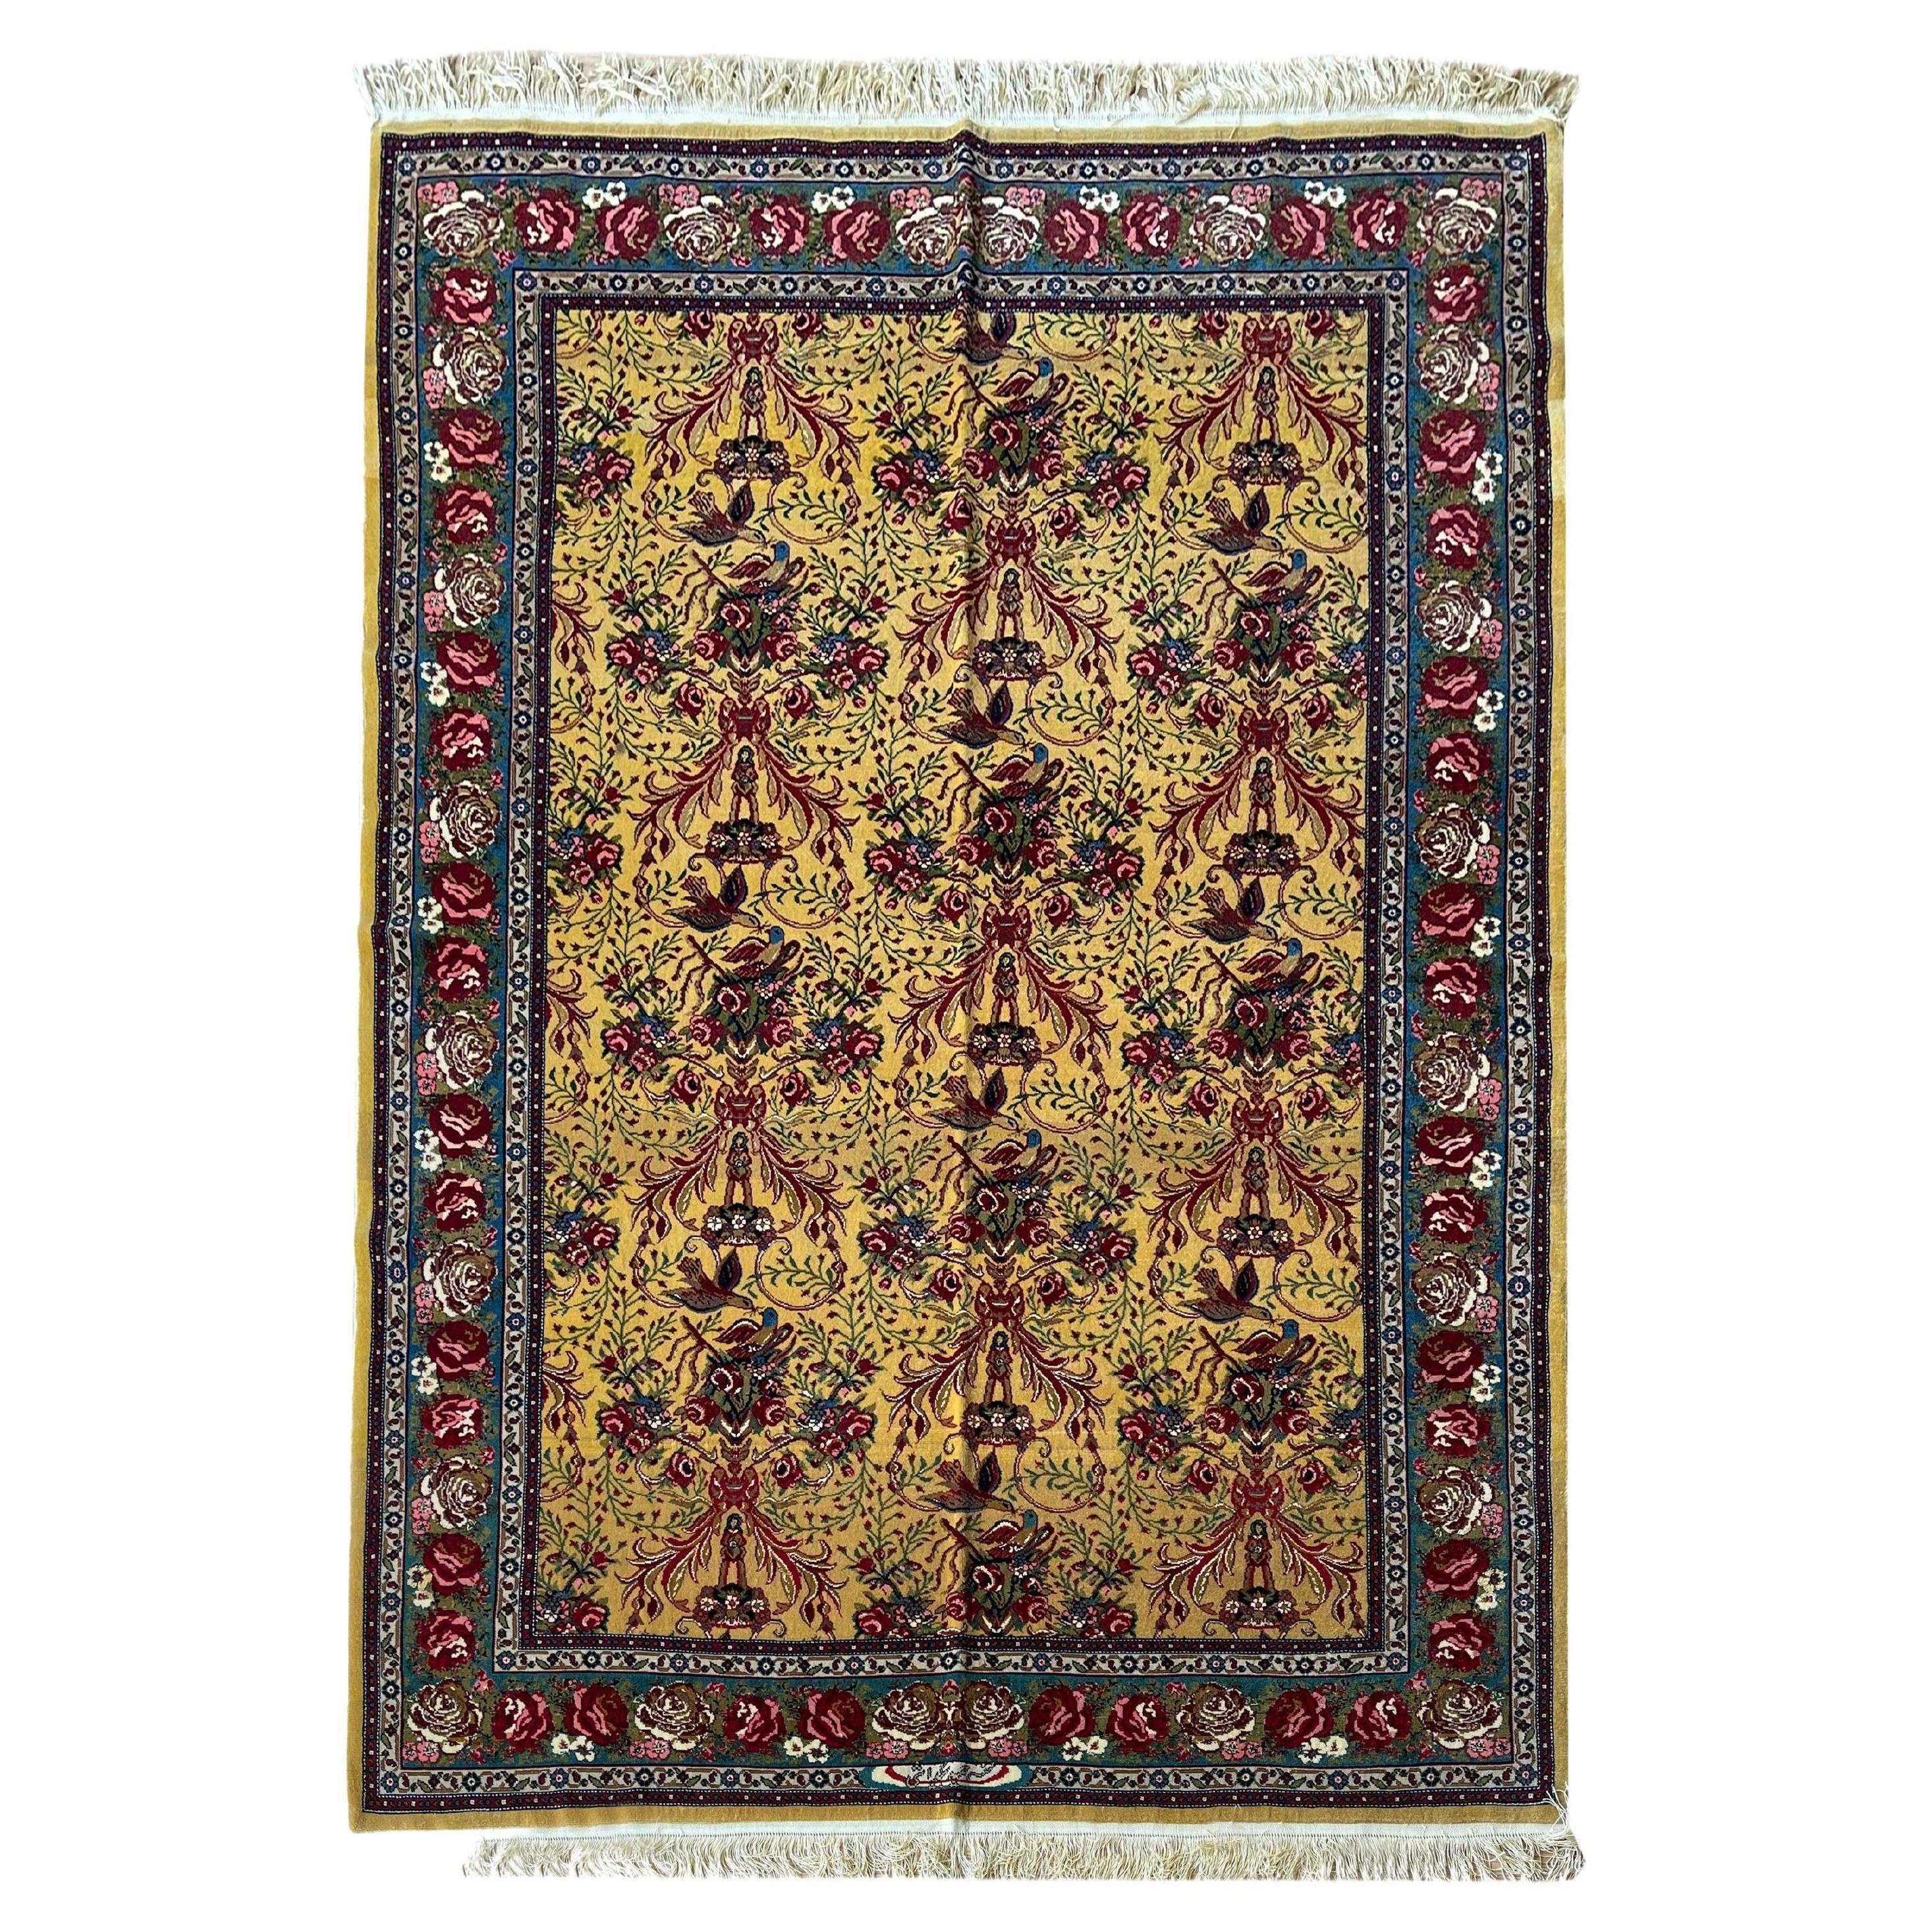 Outstanding Rug, All Over Paradise Carpet, Handwoven Gold Rug